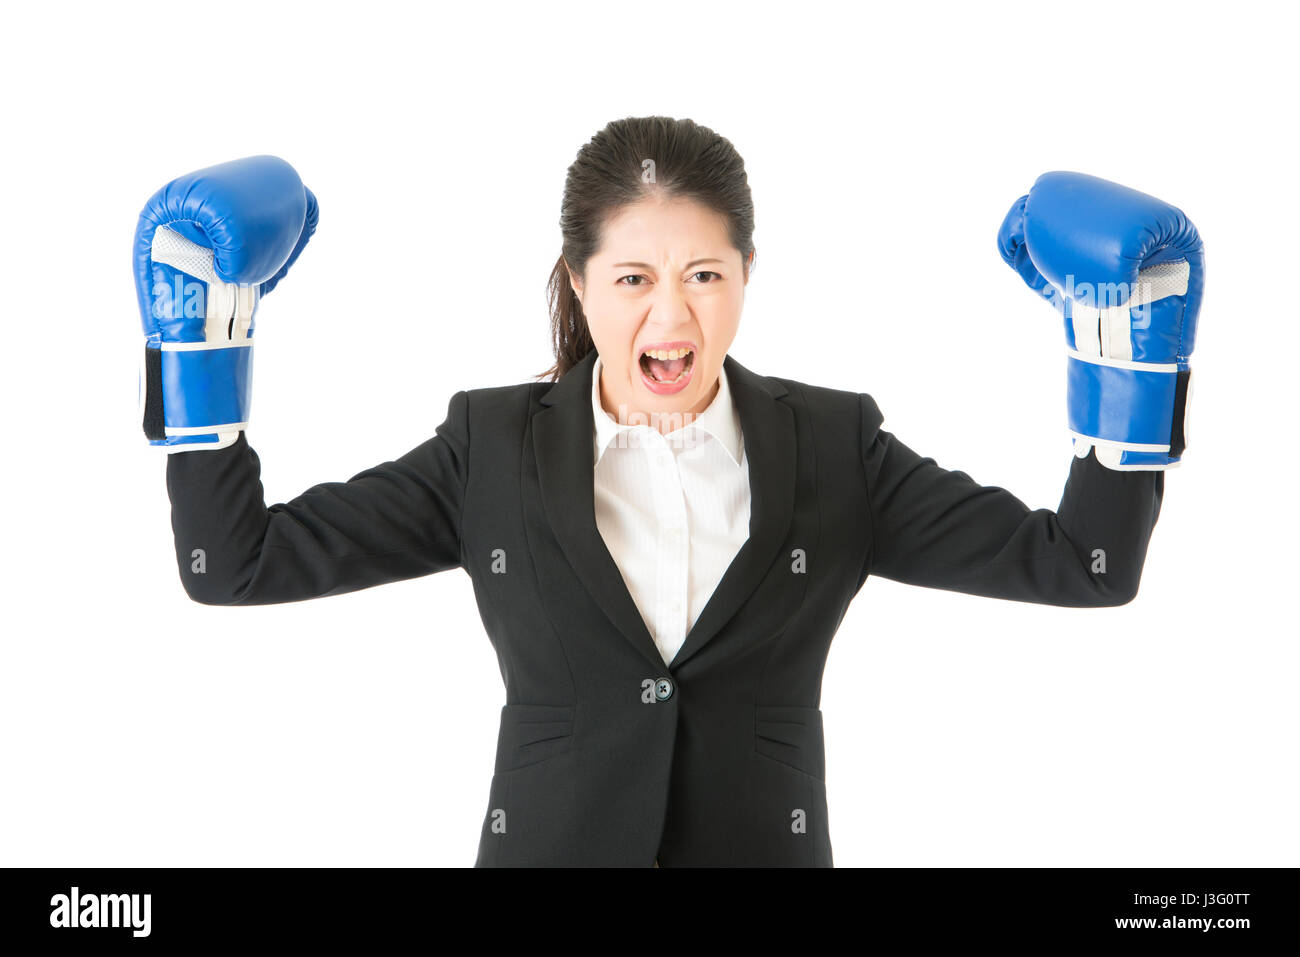 Boxing gloves business woman angry showing aggressive female businessperson flexing muscles wearing boxing gloves isolated on white background. young  Stock Photo